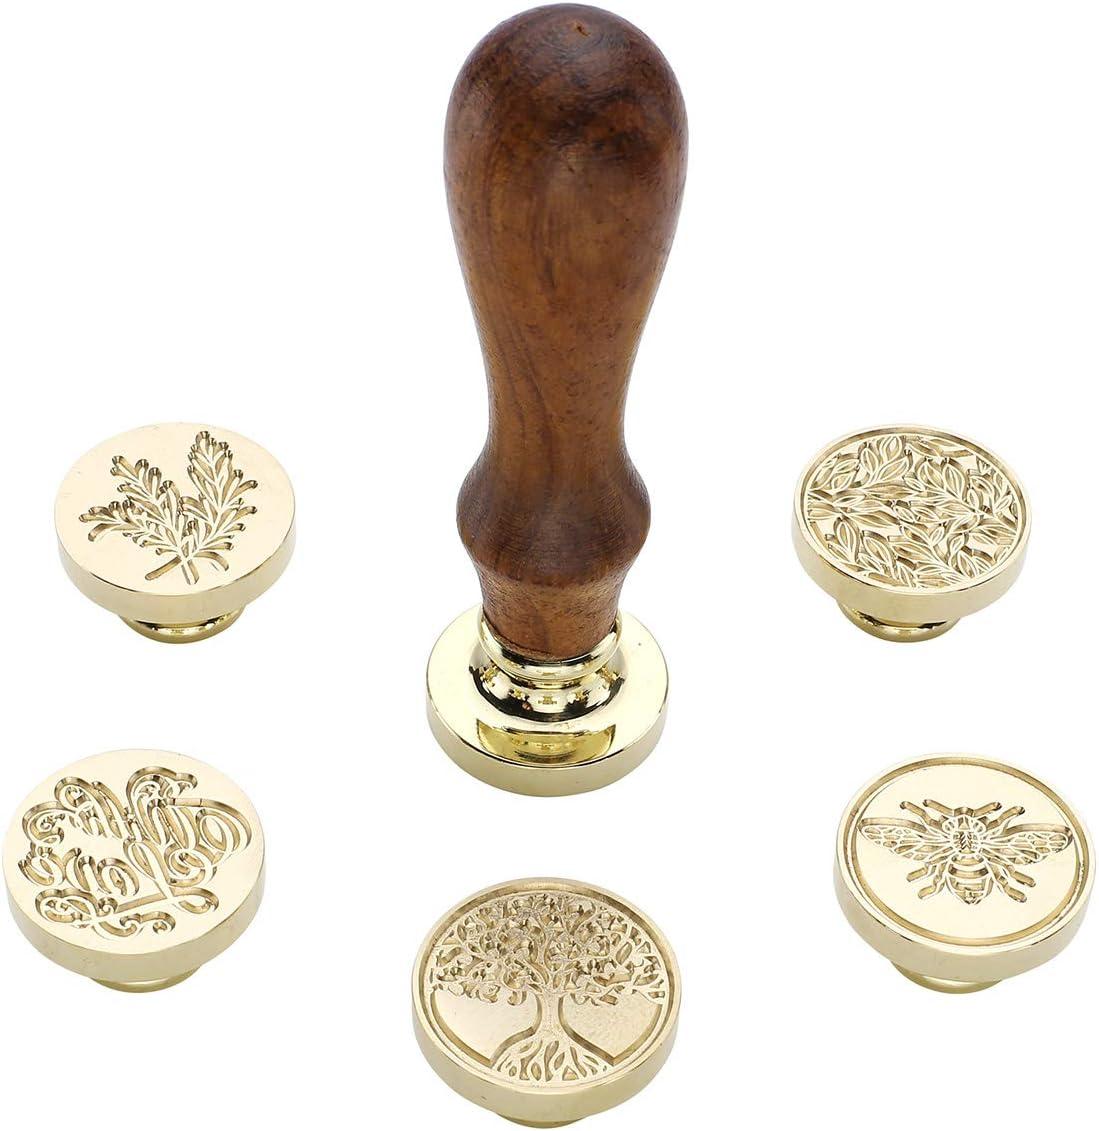 Mangsen Wax Seal Stamp Set 6pcs Sealing Wax Stamps+Wooden Handle with Gift Box Vintage Retro Wax Stamp Sealing (Love+Heart+Tree of Life+Fur+Insect+